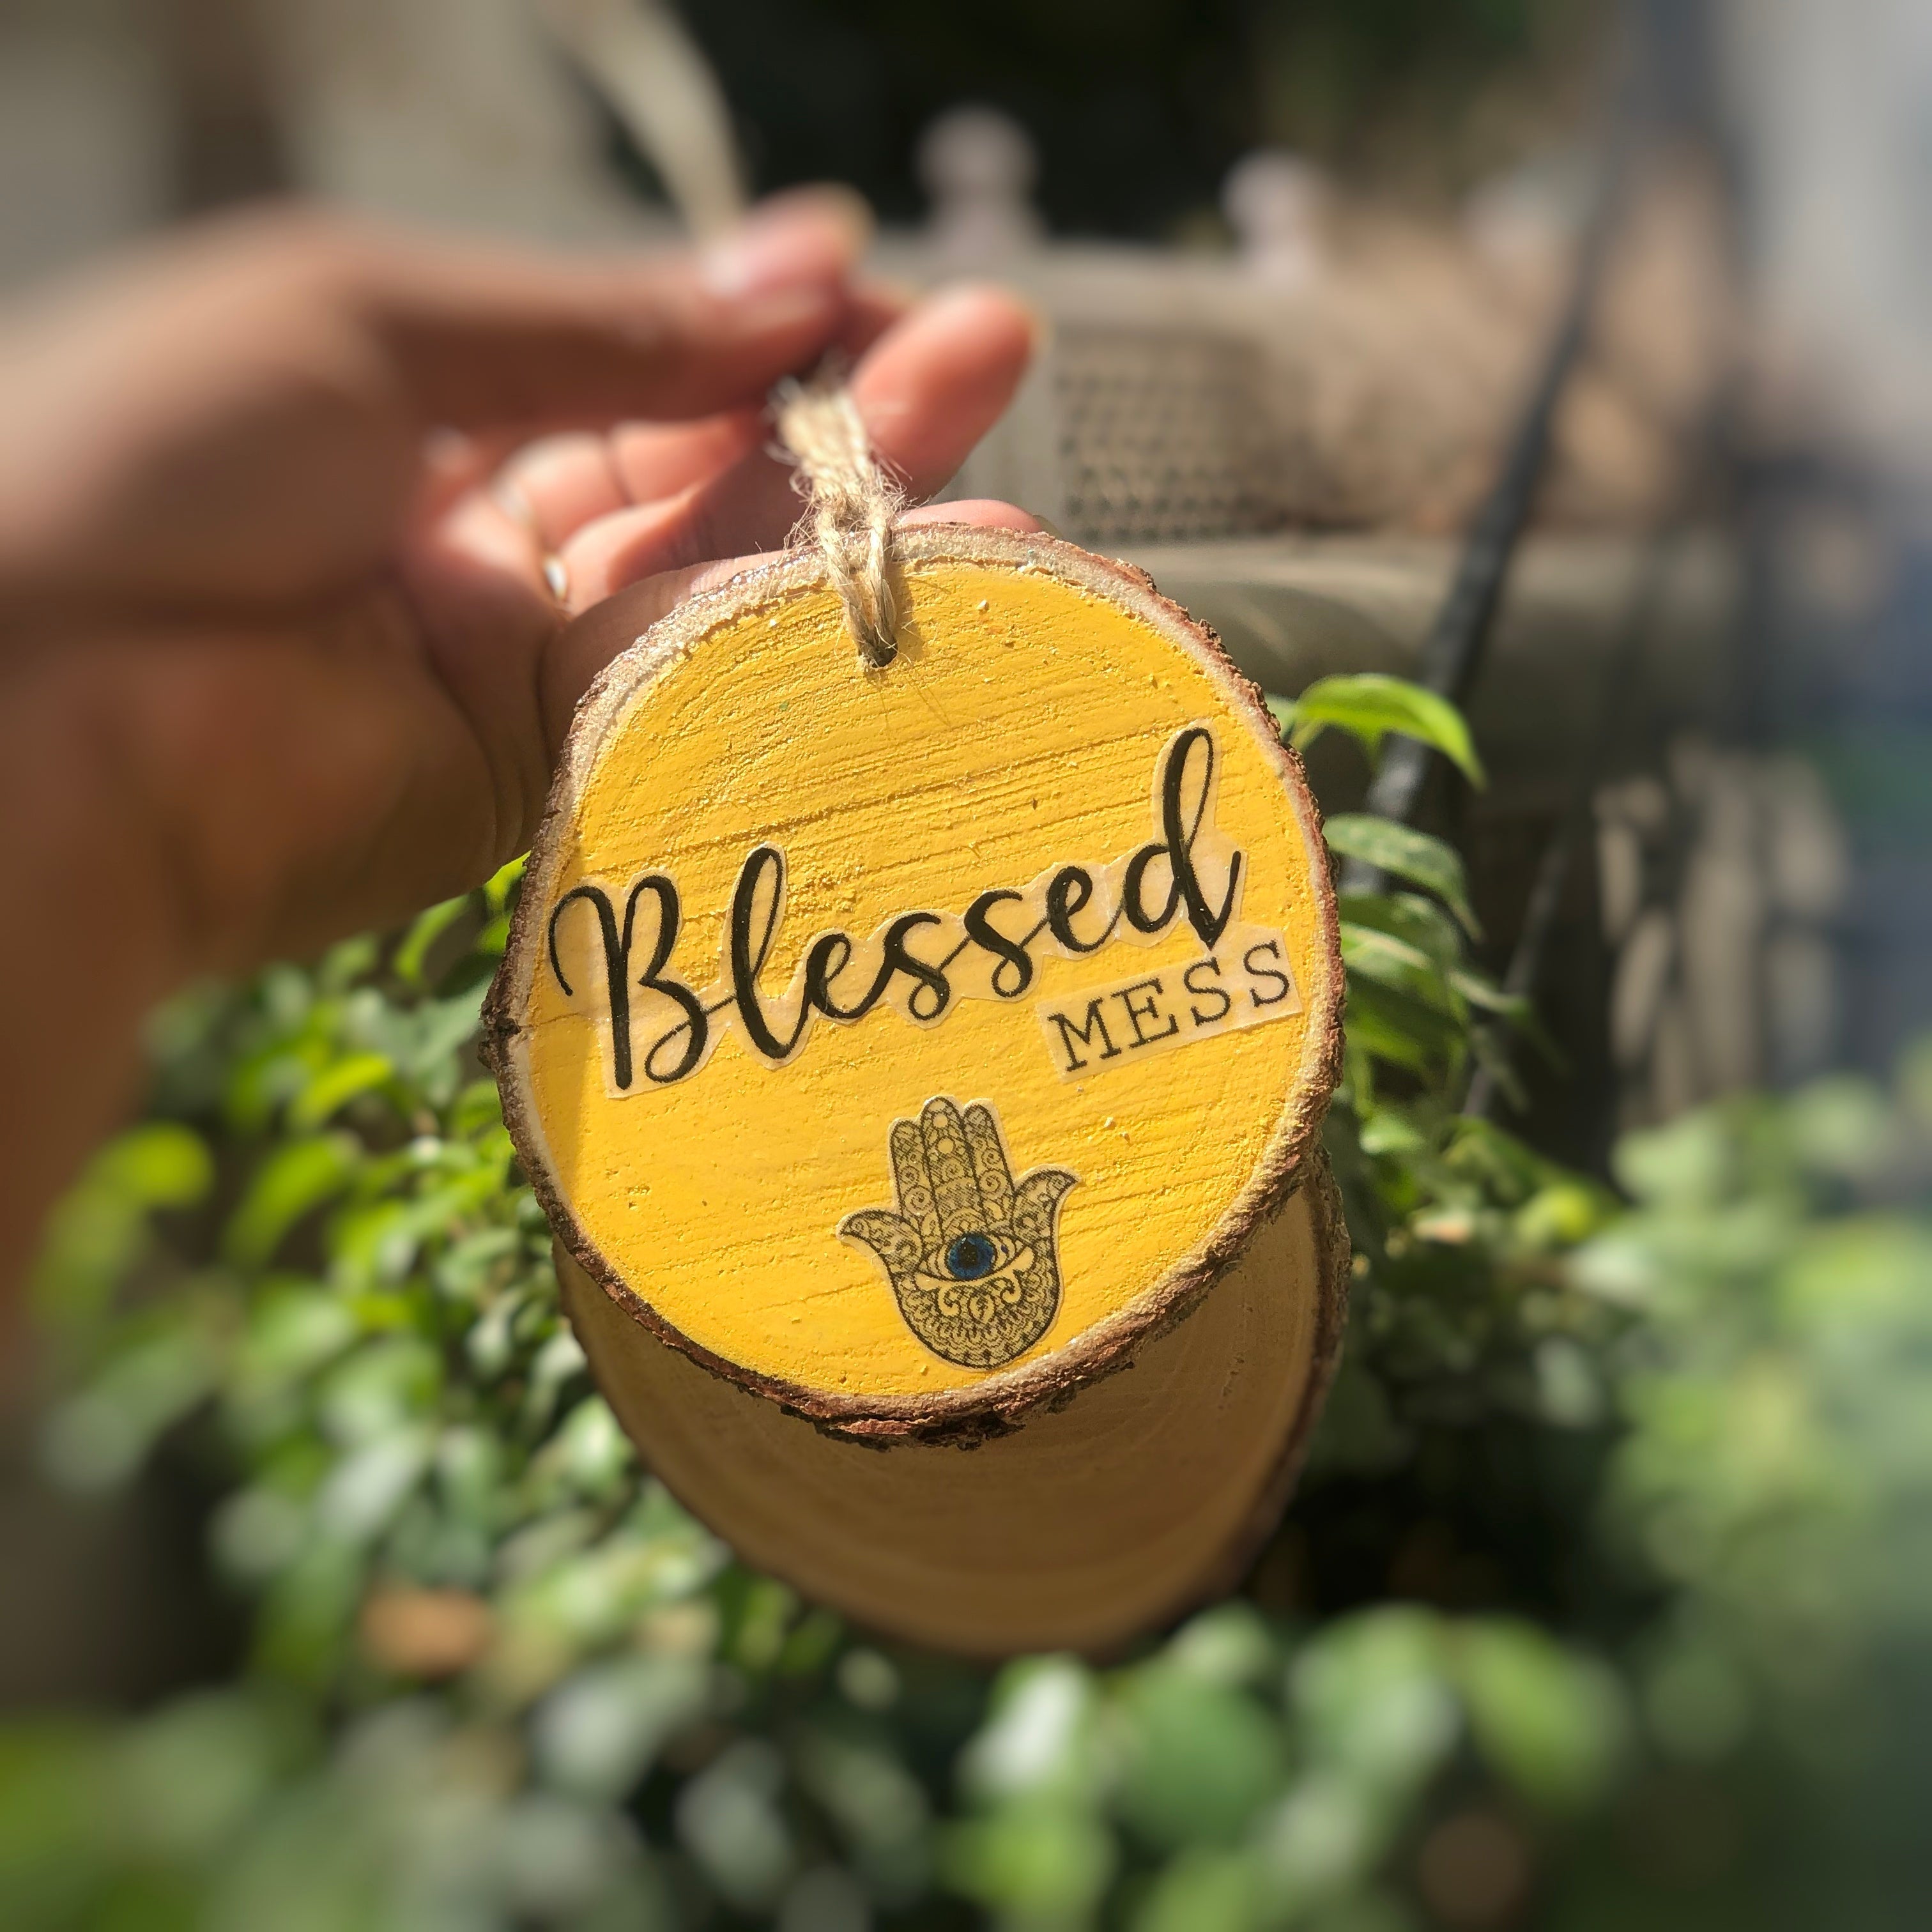 Blessed mess & Pure bliss Combo